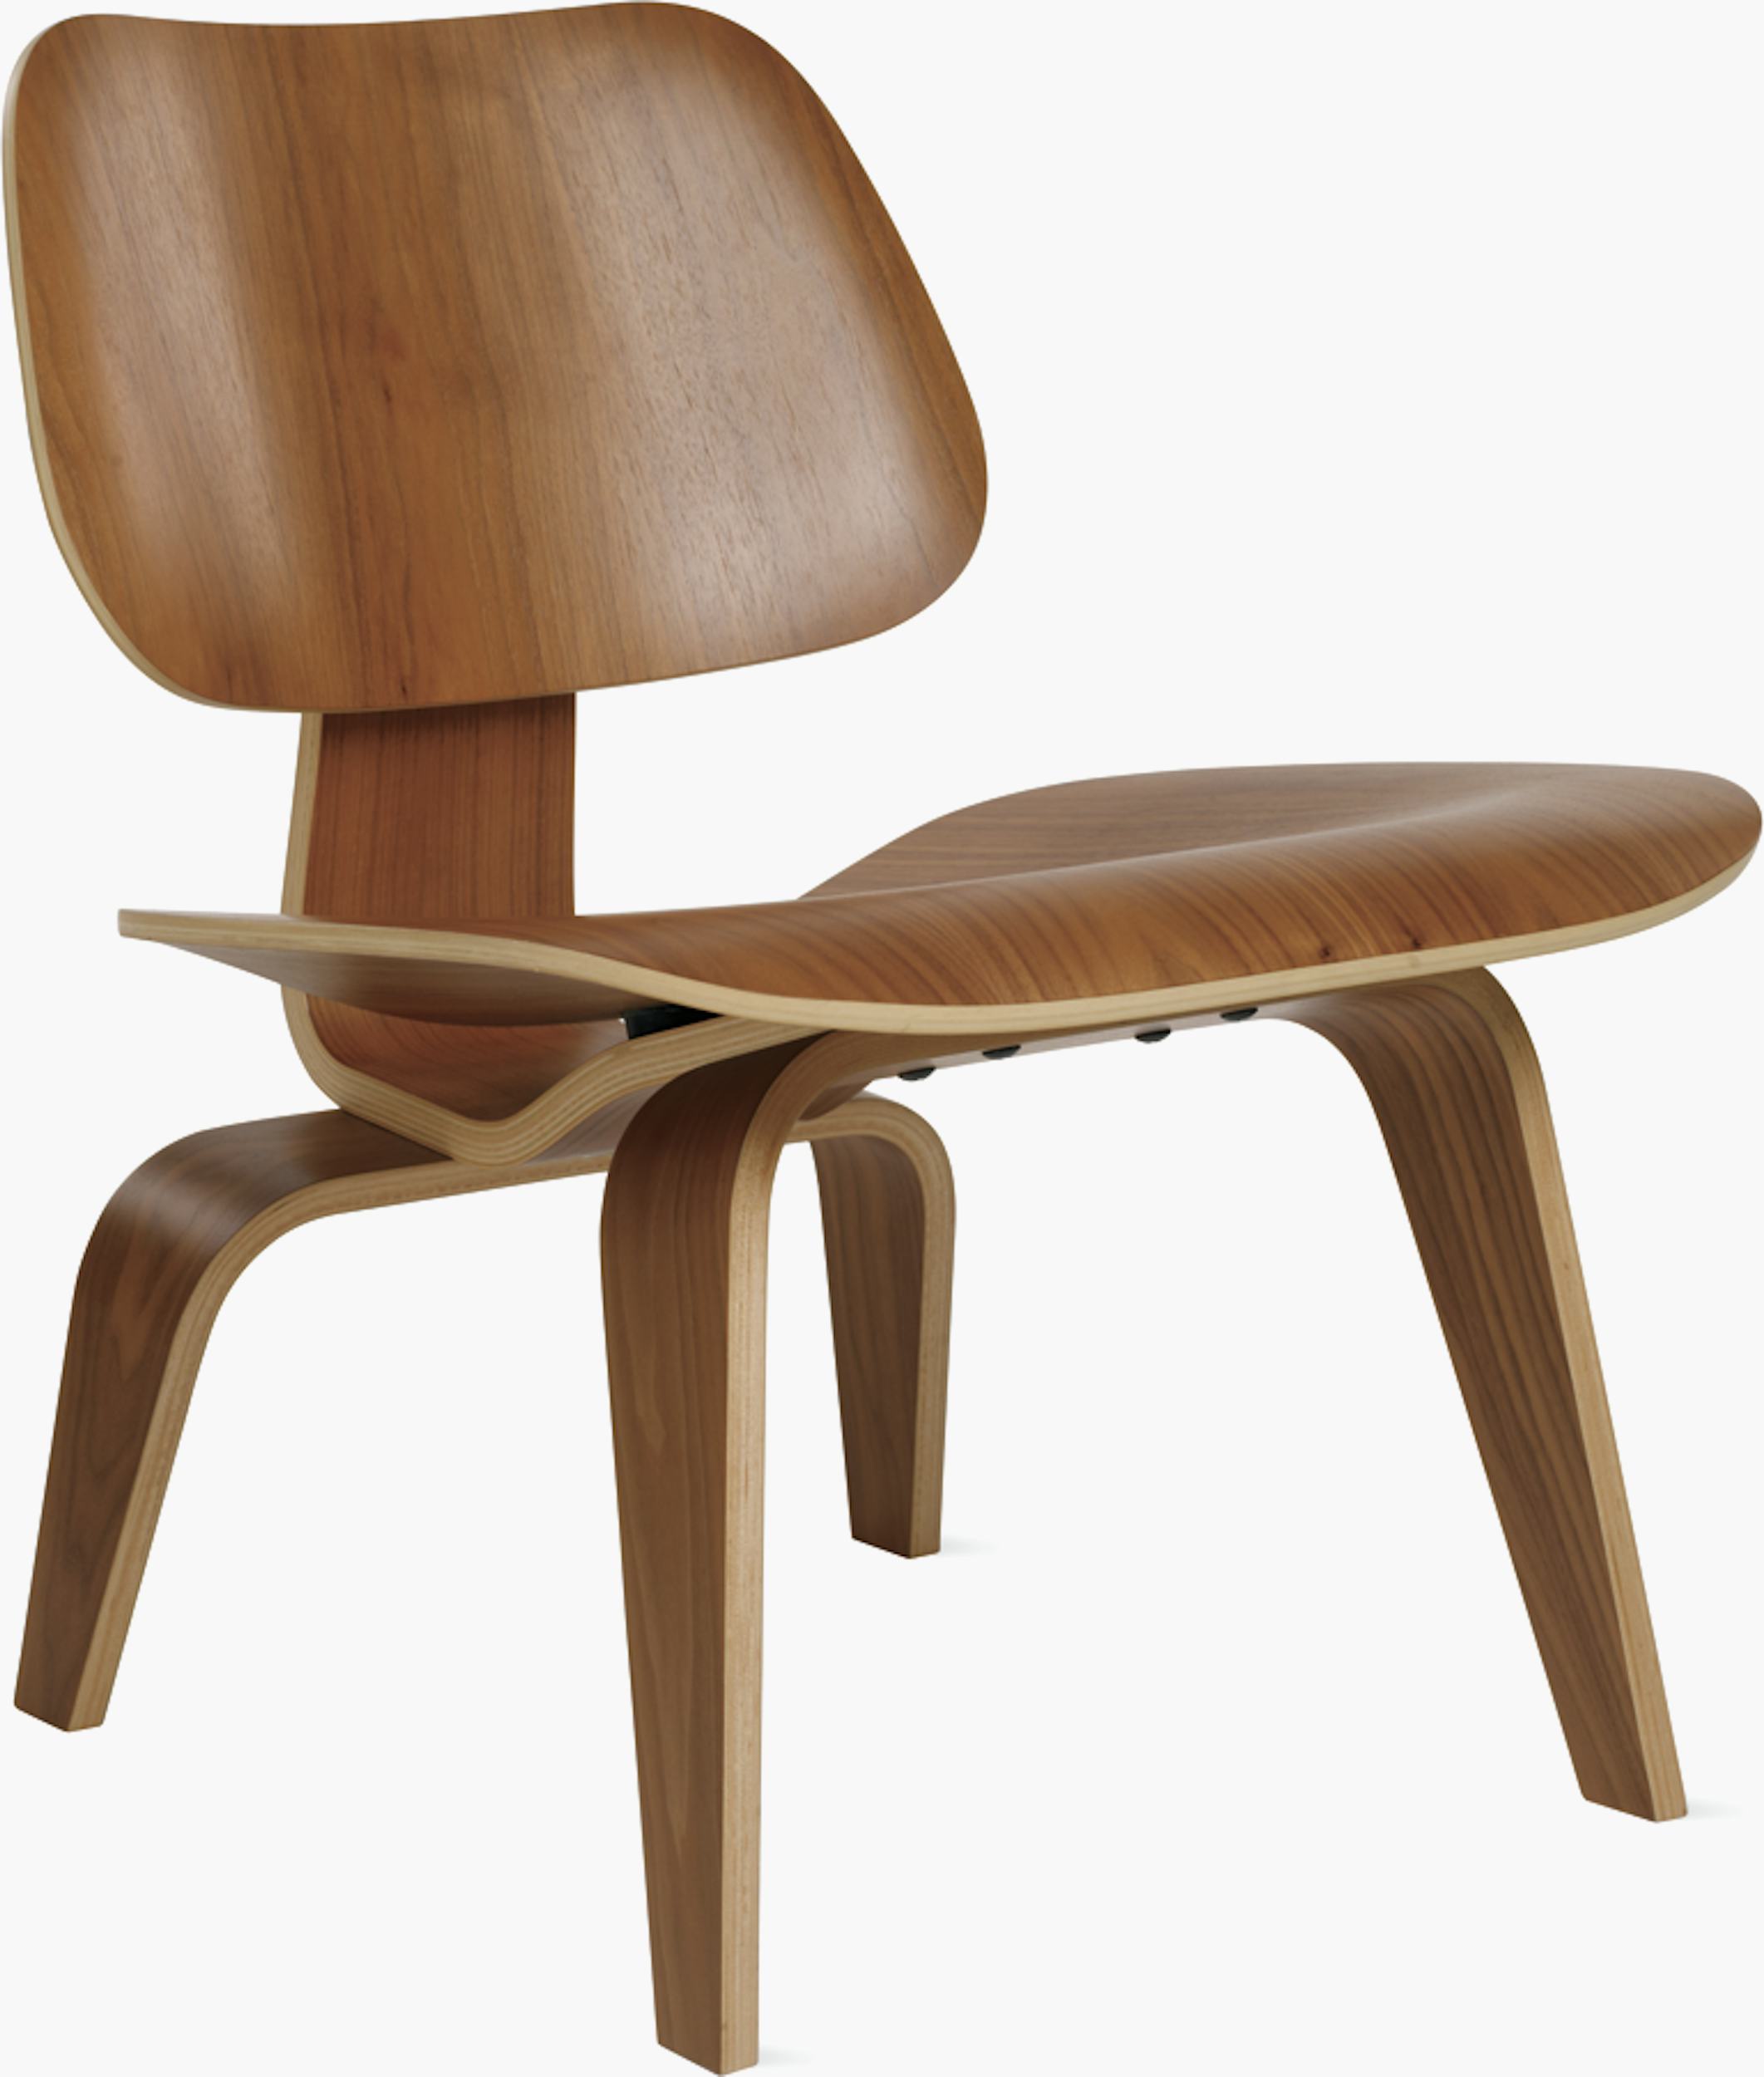 Eames Molded Plywood Lounge Chair, Herman Miller x HAY - Eames Office